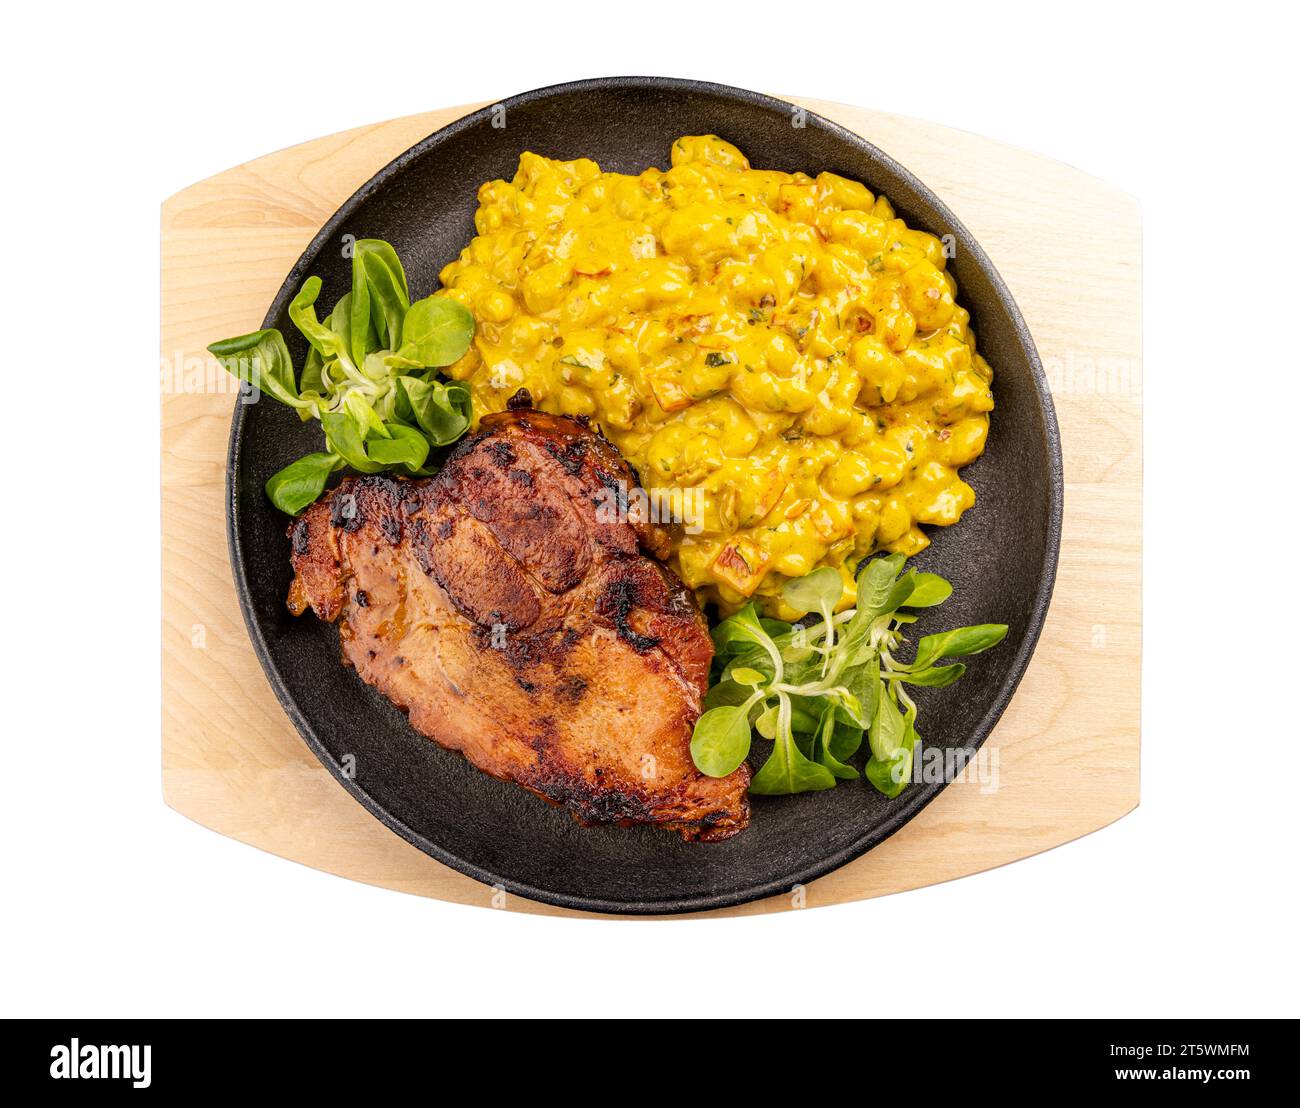 Grilled pork chop or cutlet served with homemade small gnocchi in cream sauce Stock Photo